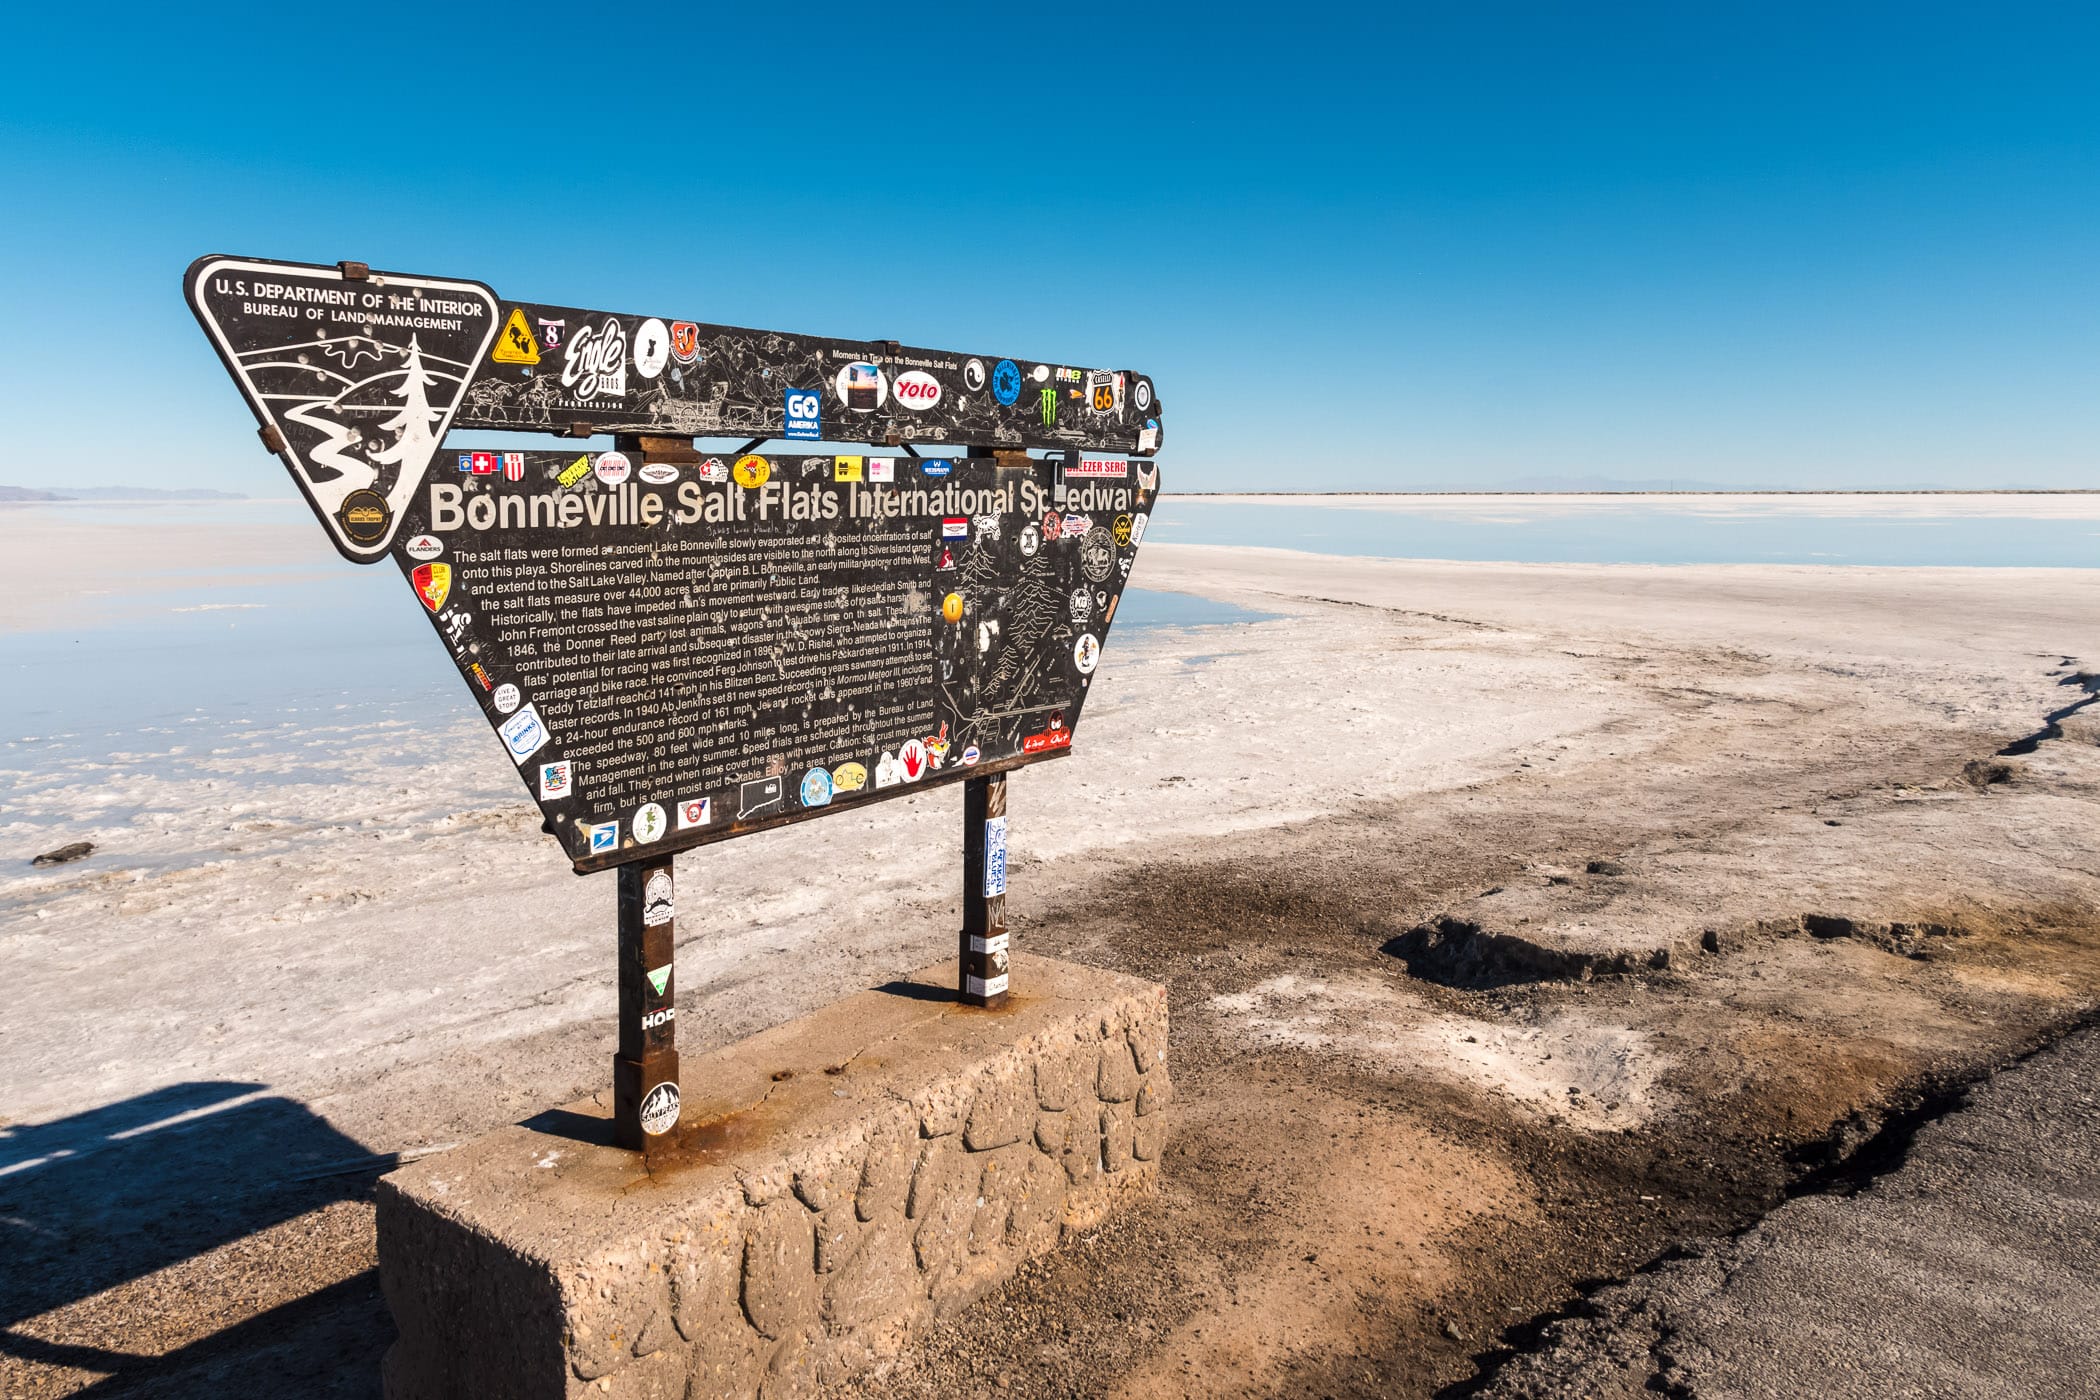 A sign at the Bonneville Salt Flats International Speedway in Utah explains the history of the site to visitors.